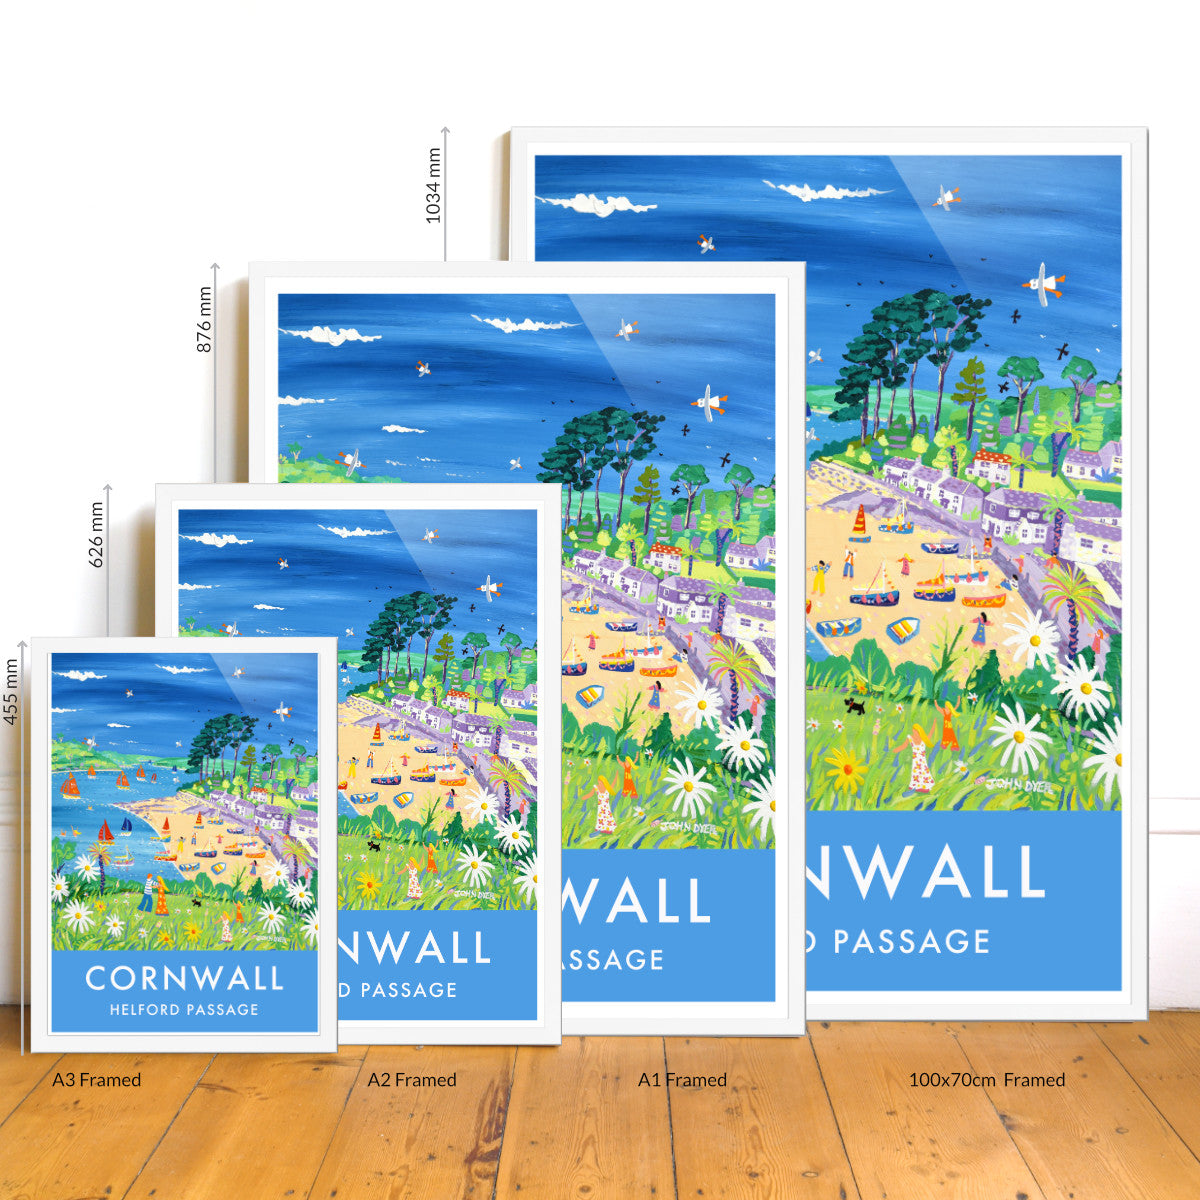 Helford Passage Art Prints of Cornwall by Cornish Artist John Dyer. Vintage Style Poster Print Art for Homes. Cornwall Art Gallery